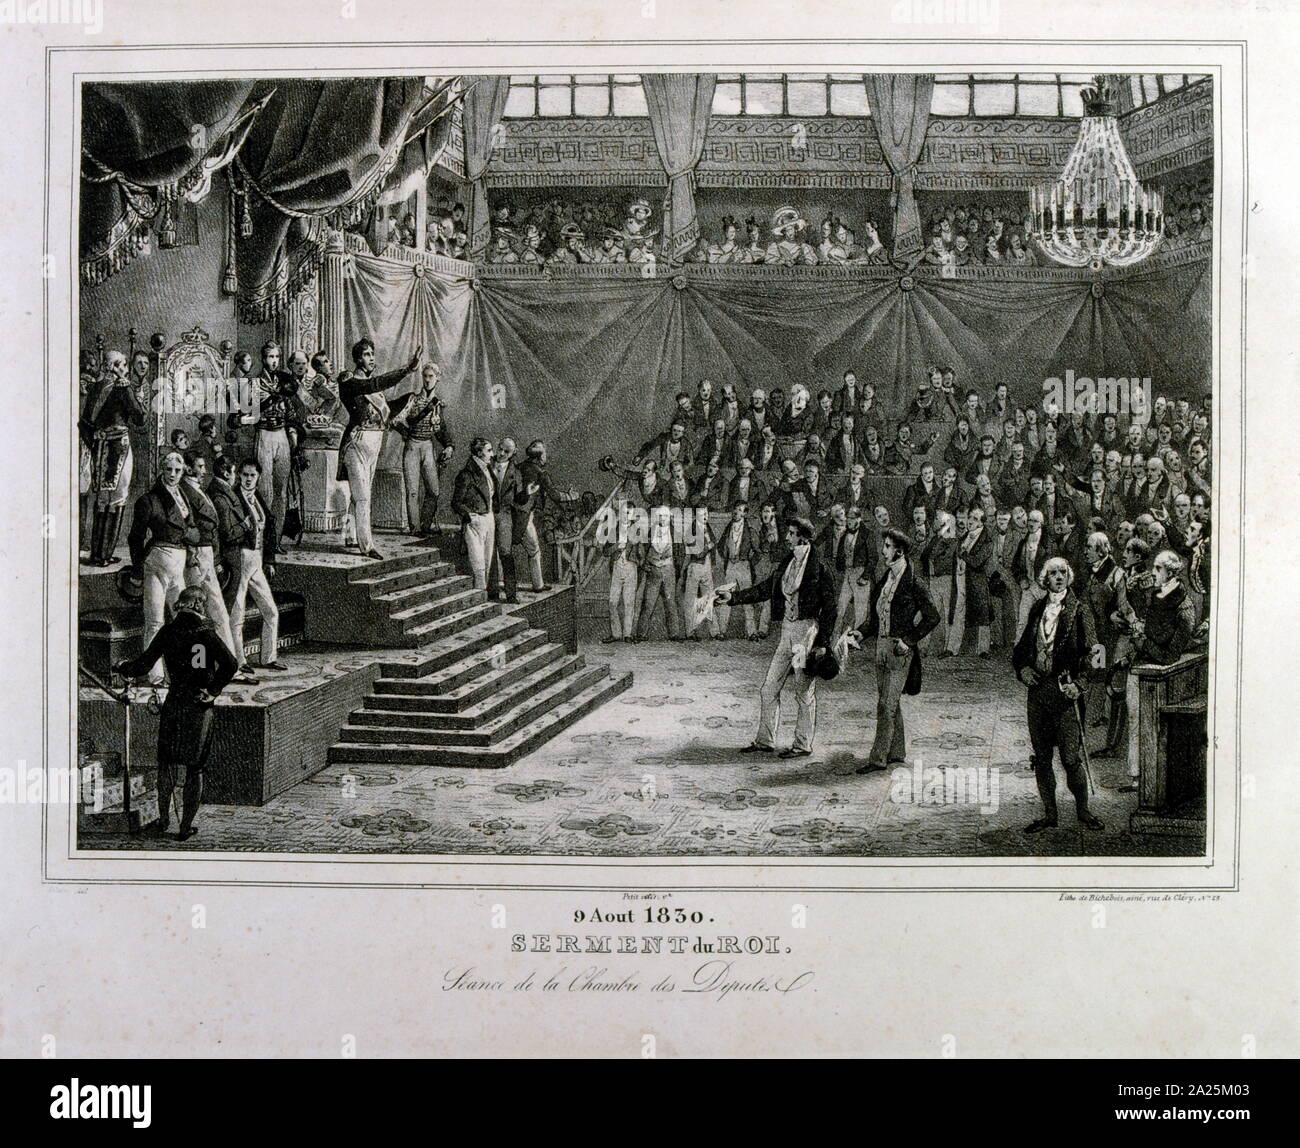 August 9, 1830. Oath of the King. Session of the Chamber of Deputies. Louis Philippe I (6 October 1773 – 26 August 1850) was King of the French from 1830 to 1848 as the leader of the Orléanist party during the July Revolution of 1830 Stock Photo